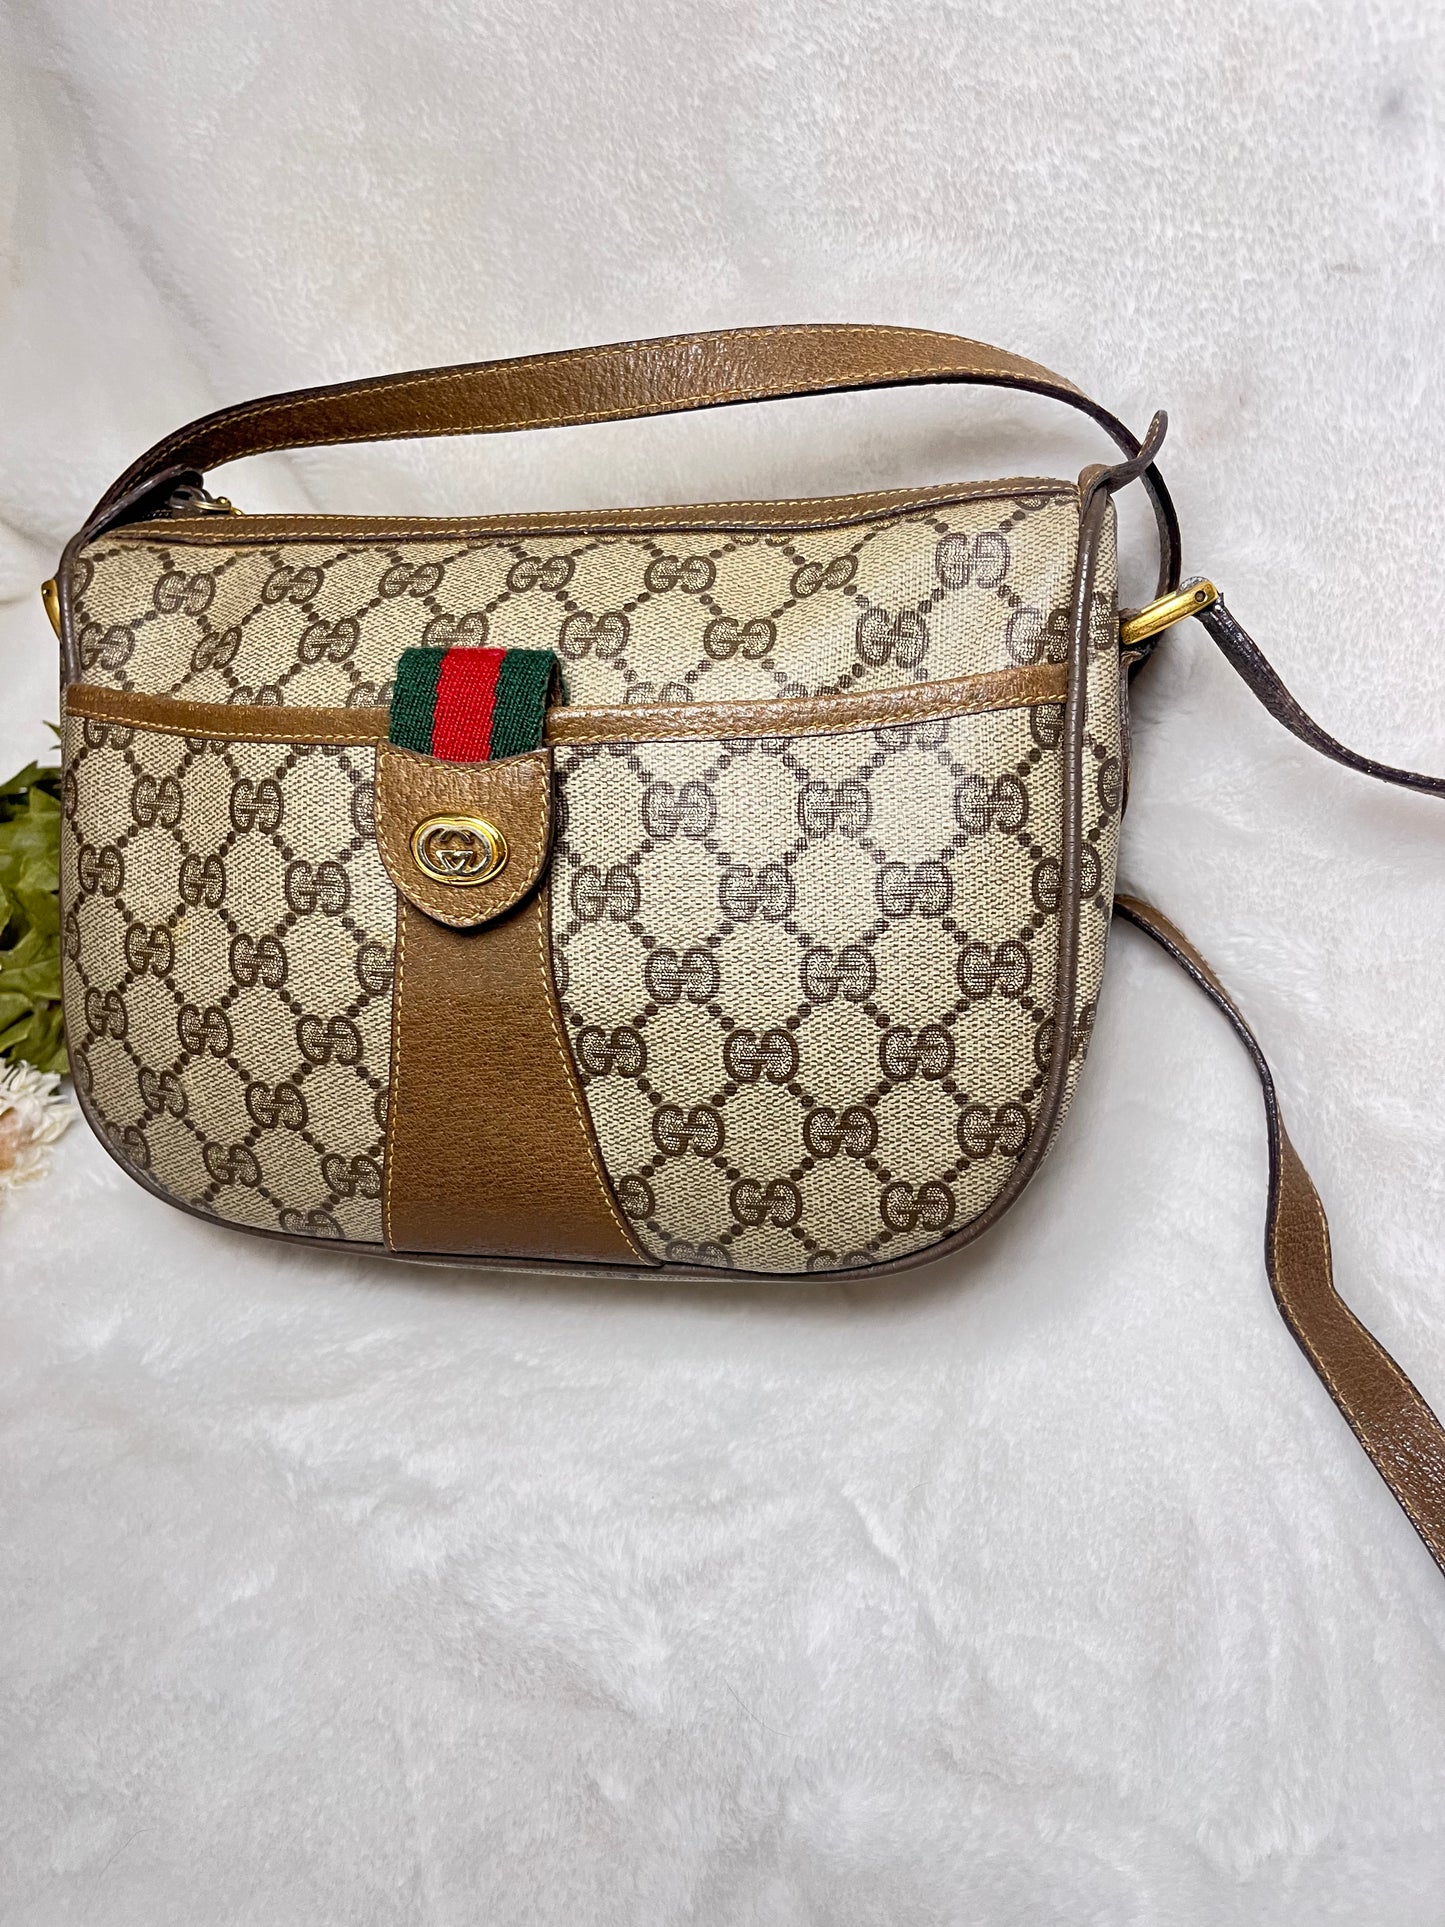 Authentic pre-owned Gucci Sherry line crossbody shoulder bag